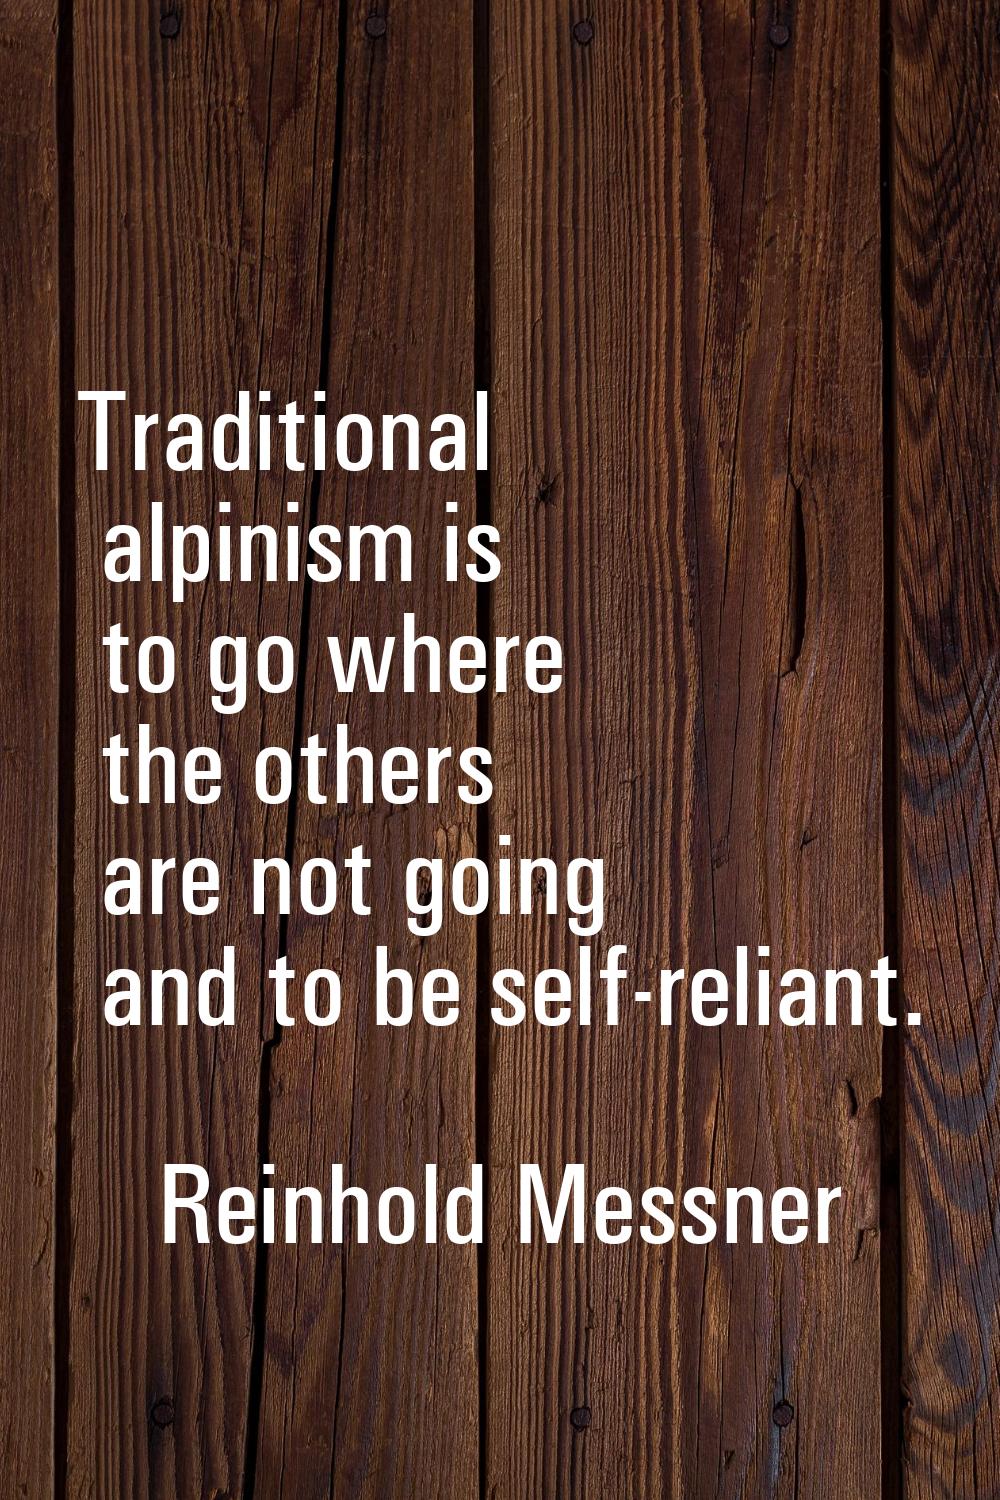 Traditional alpinism is to go where the others are not going and to be self-reliant.